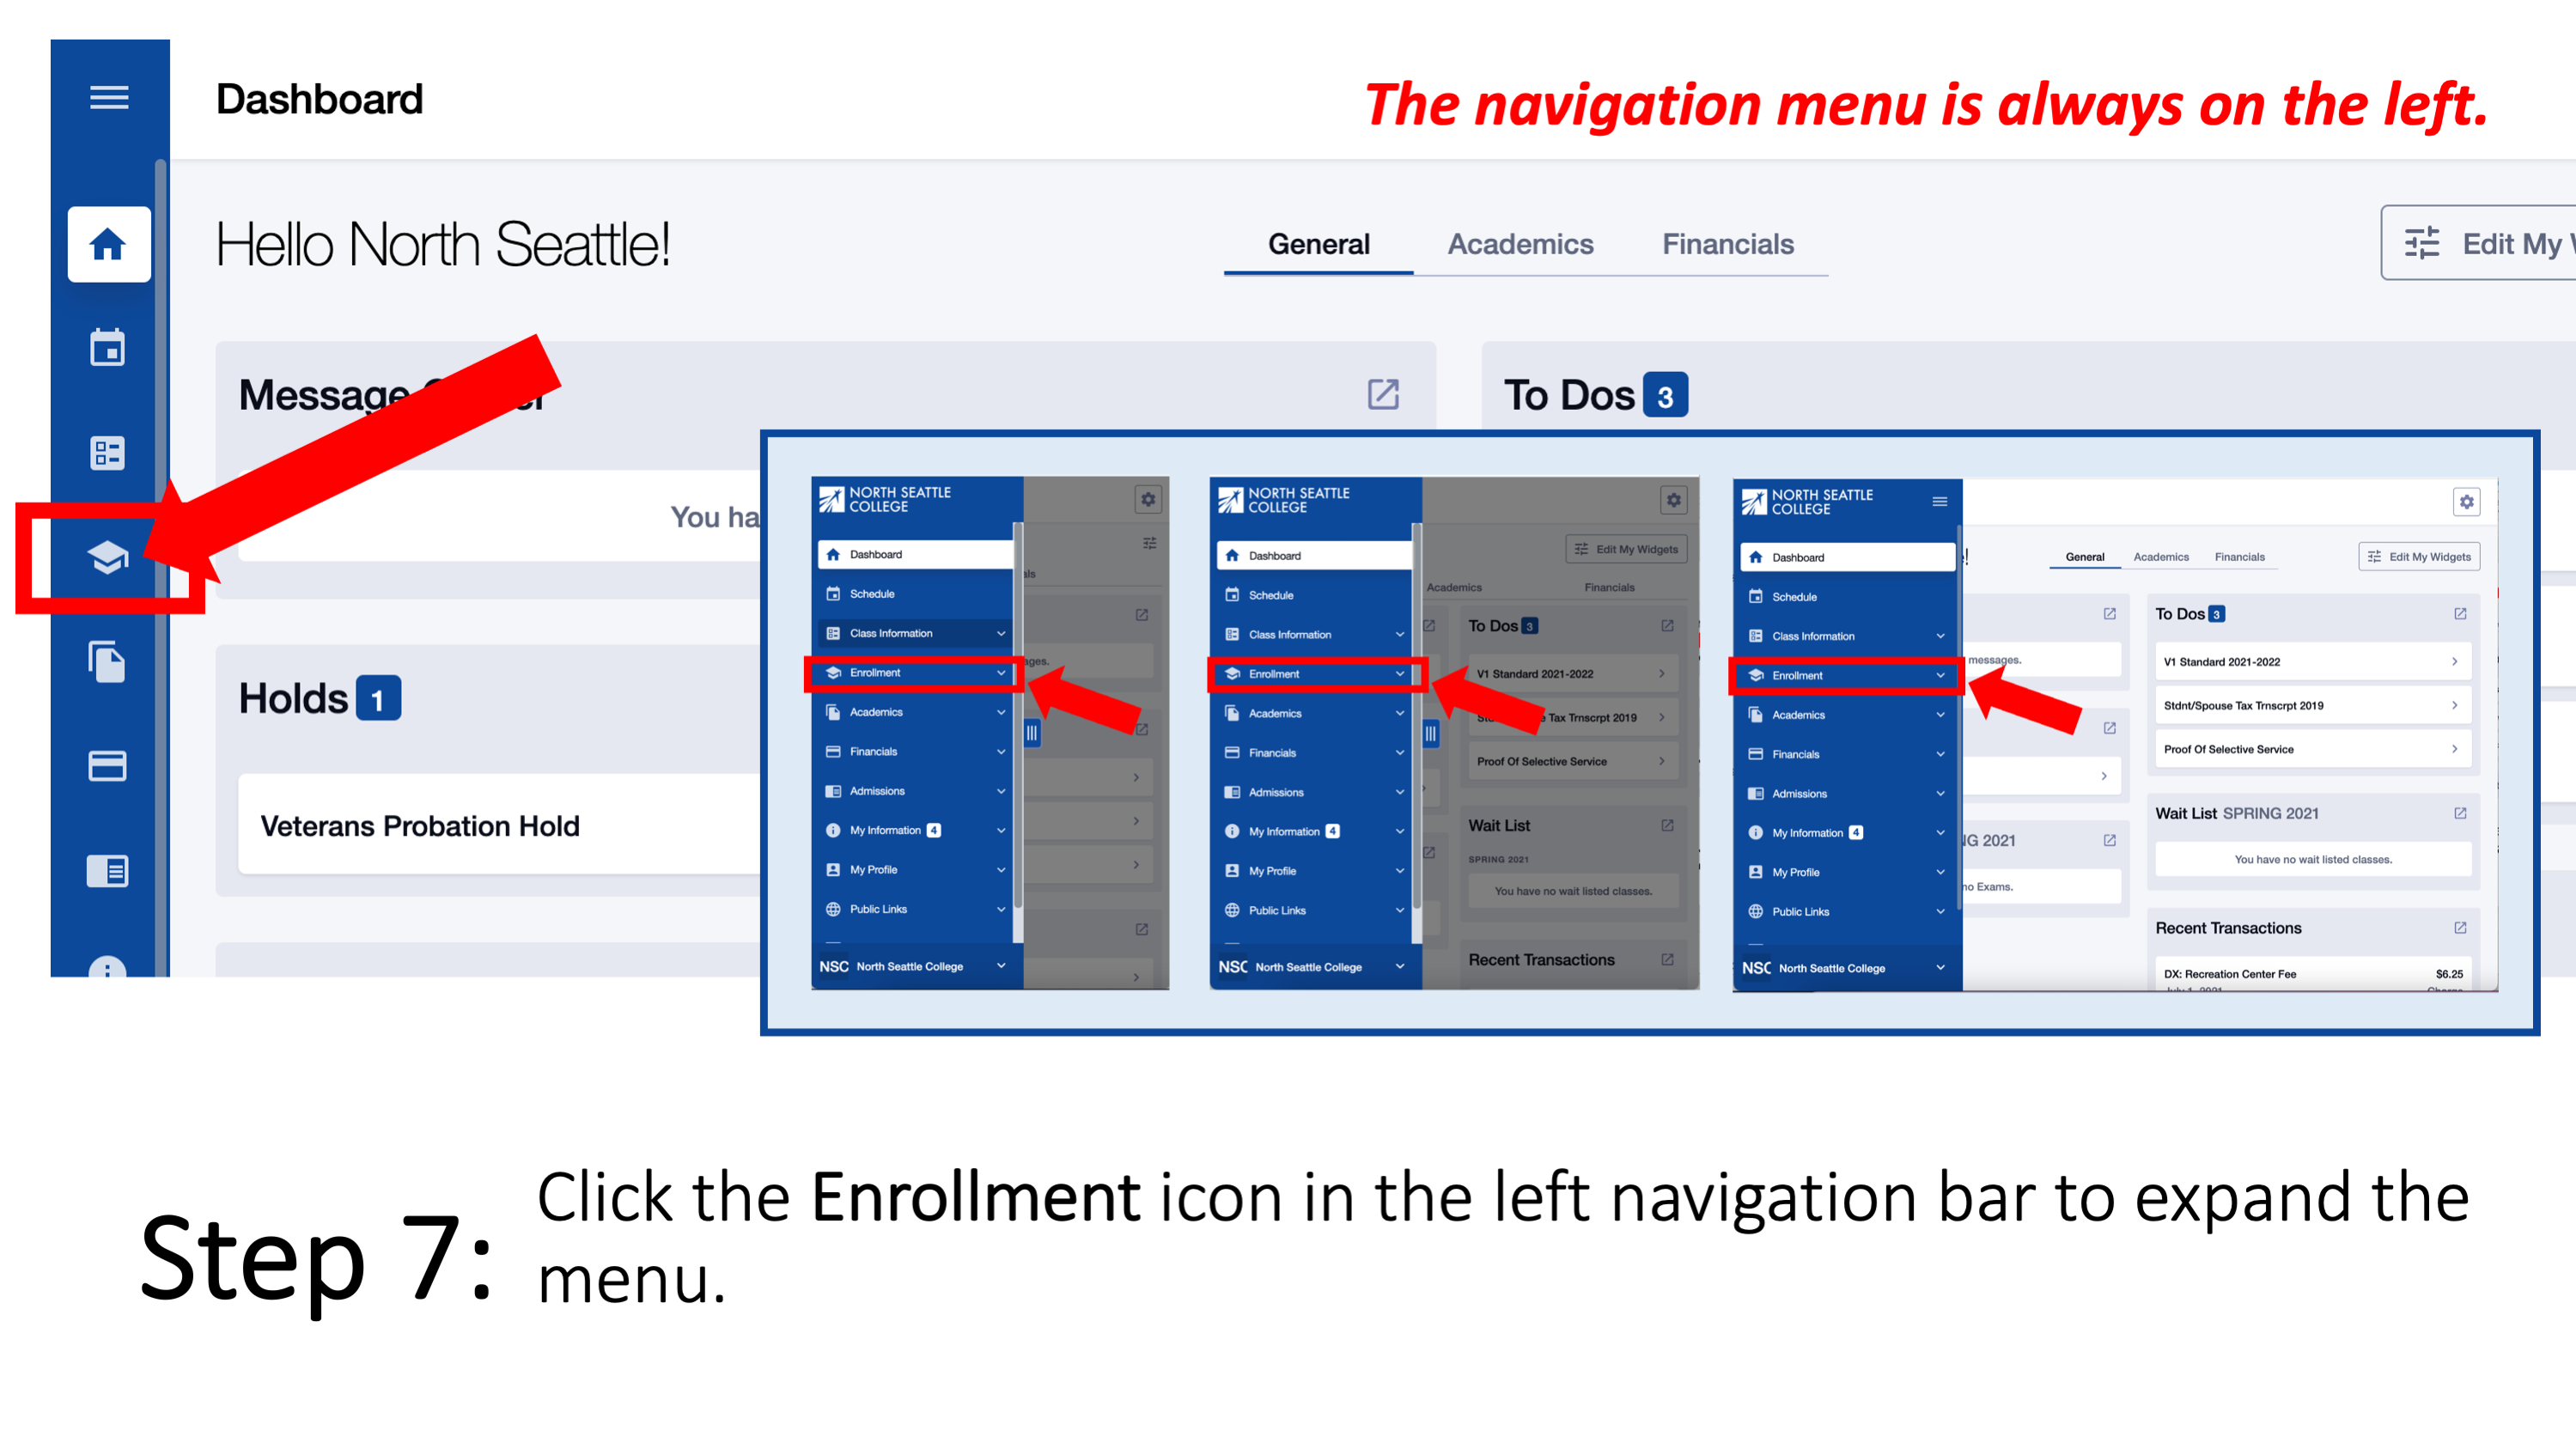 Step 7: Click the Enrollment icon in the left navigation bar to expand the menu.